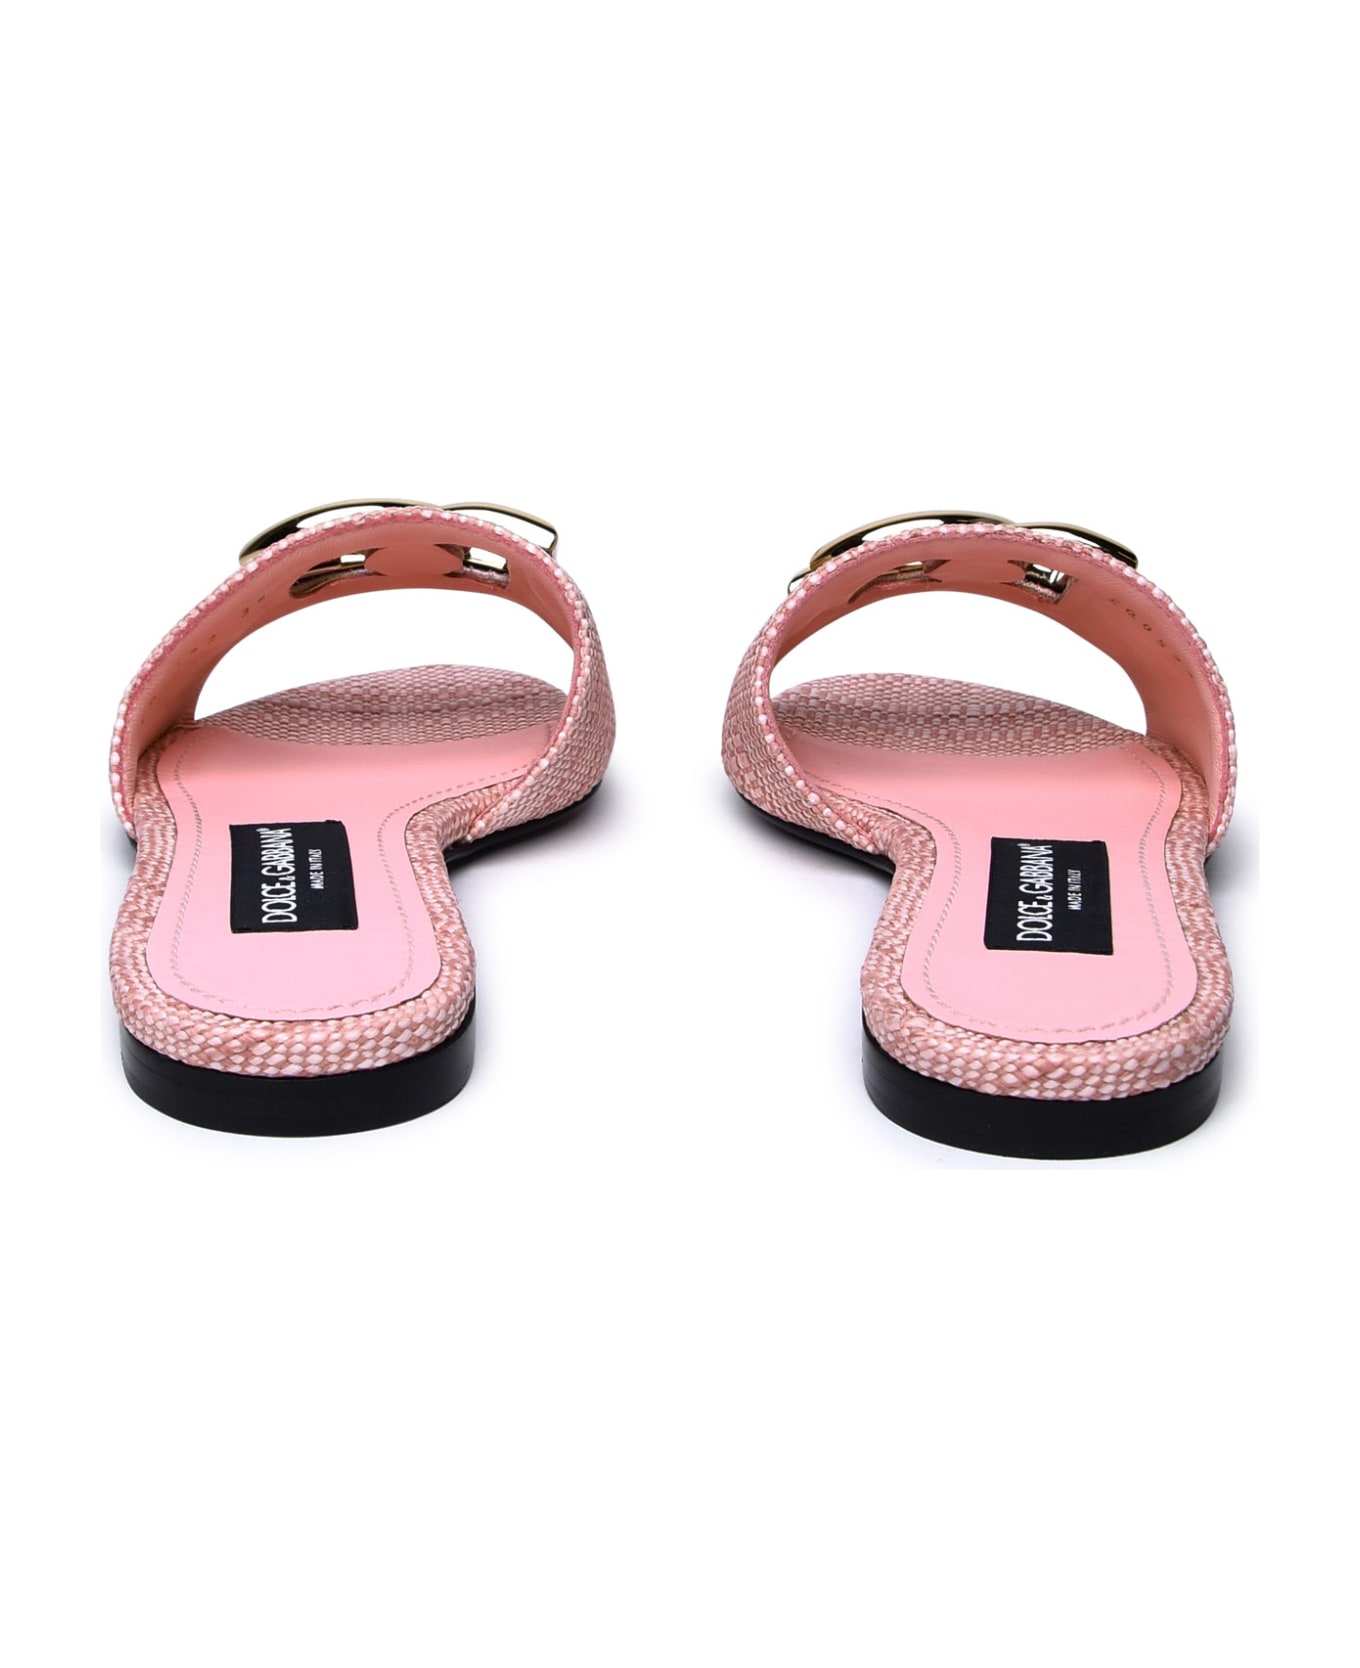 Dolce & Gabbana Pink Fabric Slippers - Pink